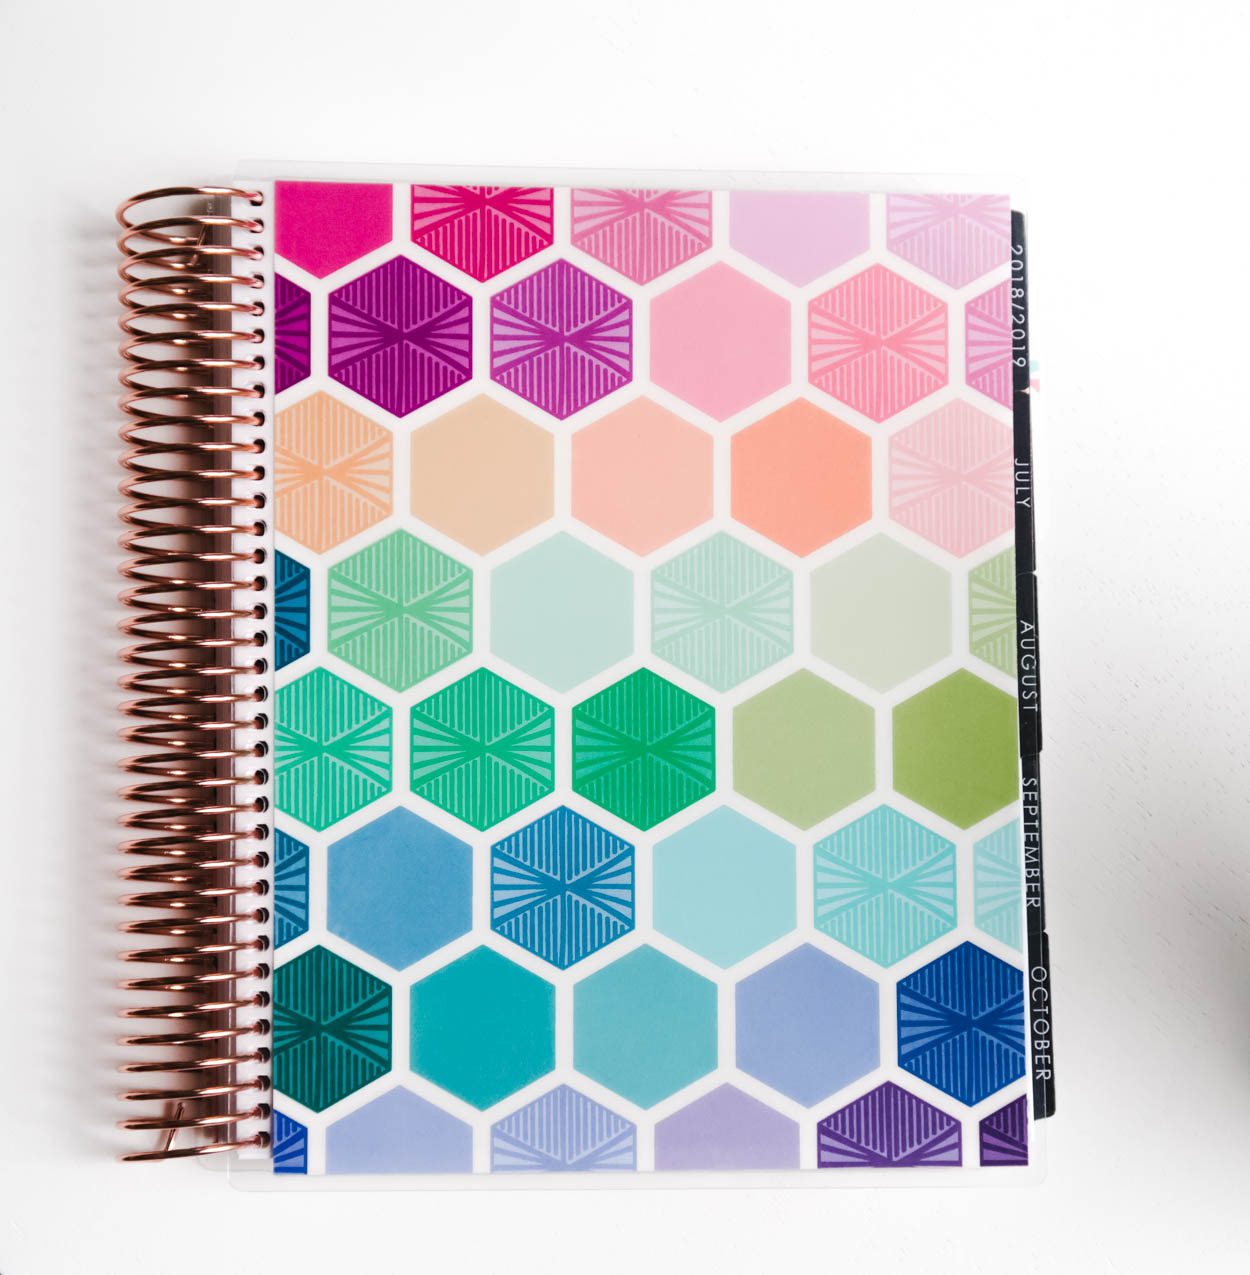 Pre-Made Bullet Dotted Journal Undated Coil Spiral Bound With No Bleed  Through Pages | Dot Grid Notebook | Premade Aesthetic Dotted Planner